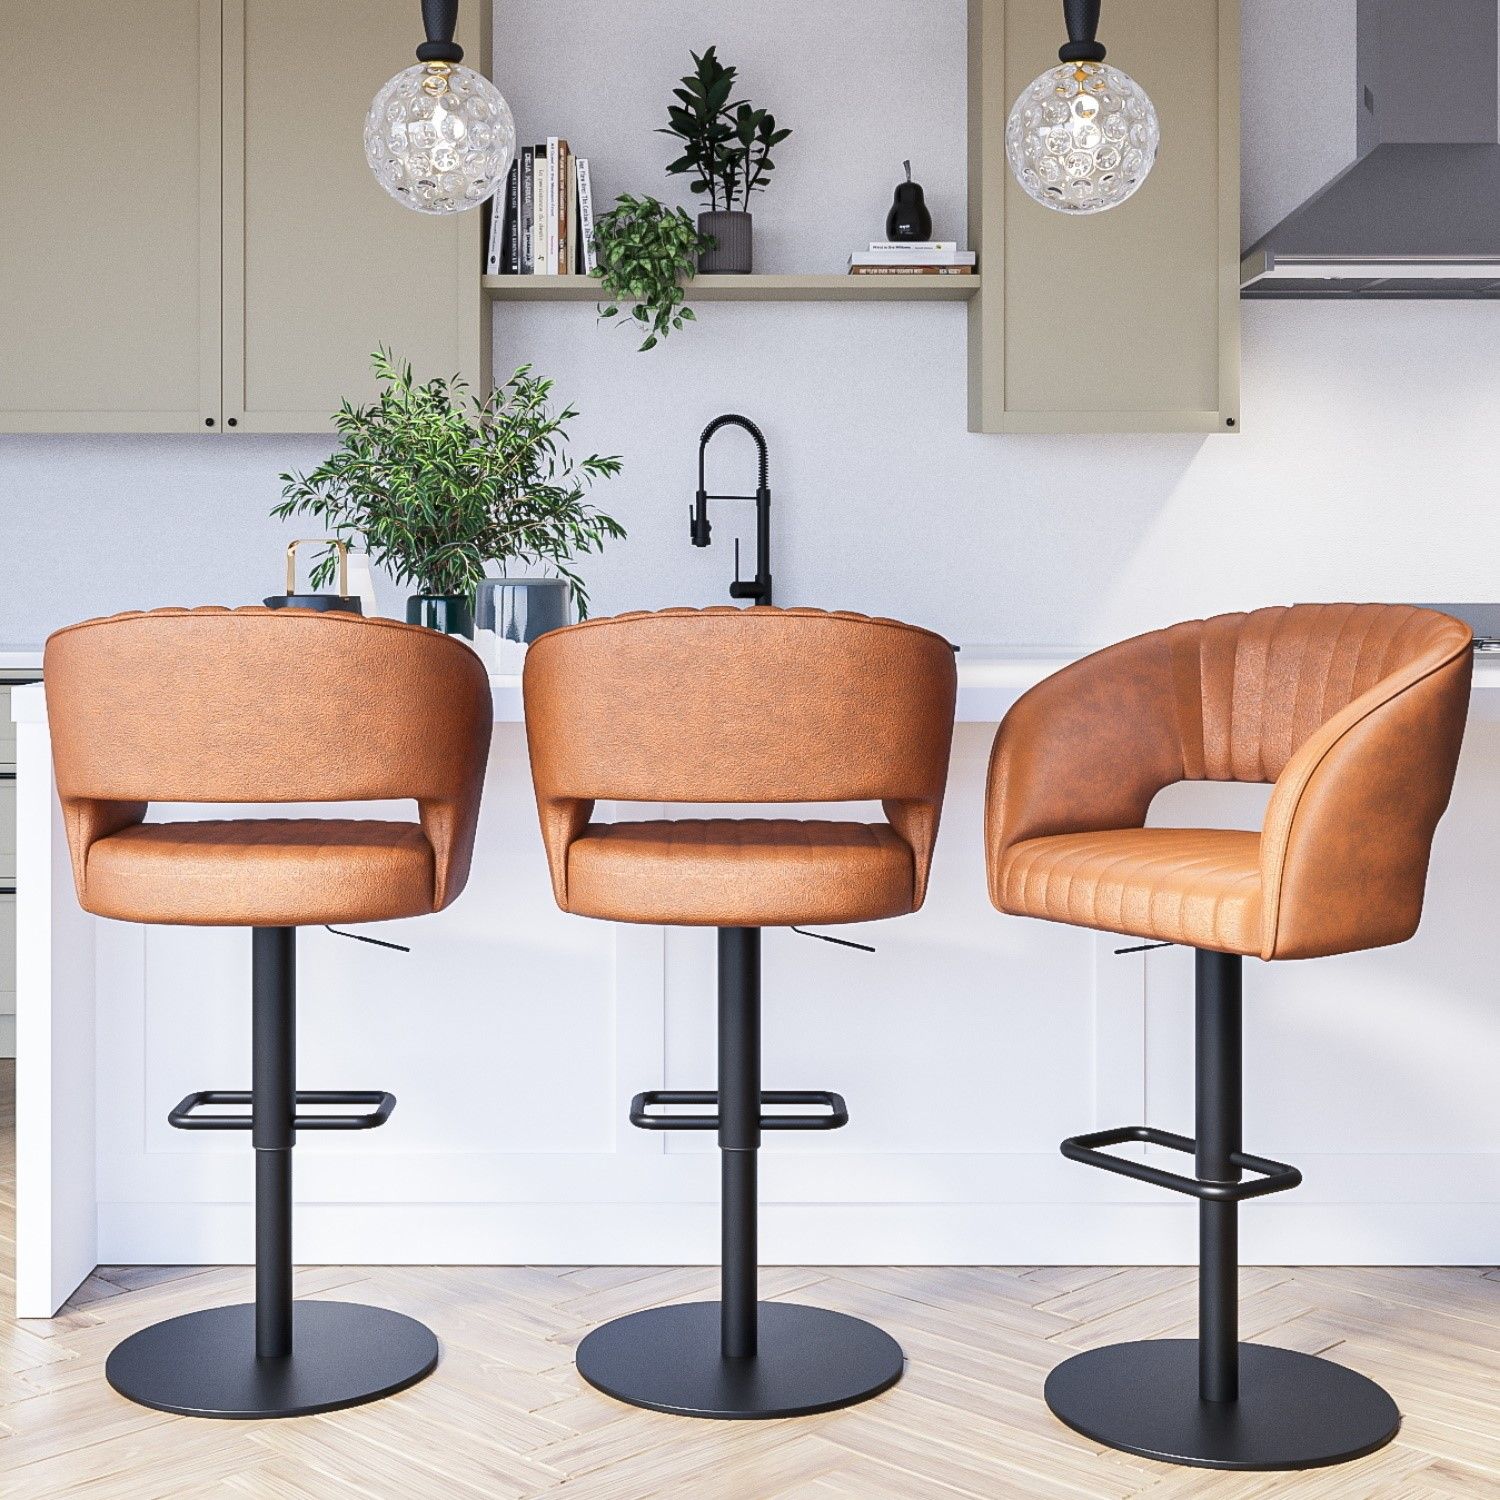 Upgrade Your Kitchen with These Stylish and Comfortable Stools with Backs